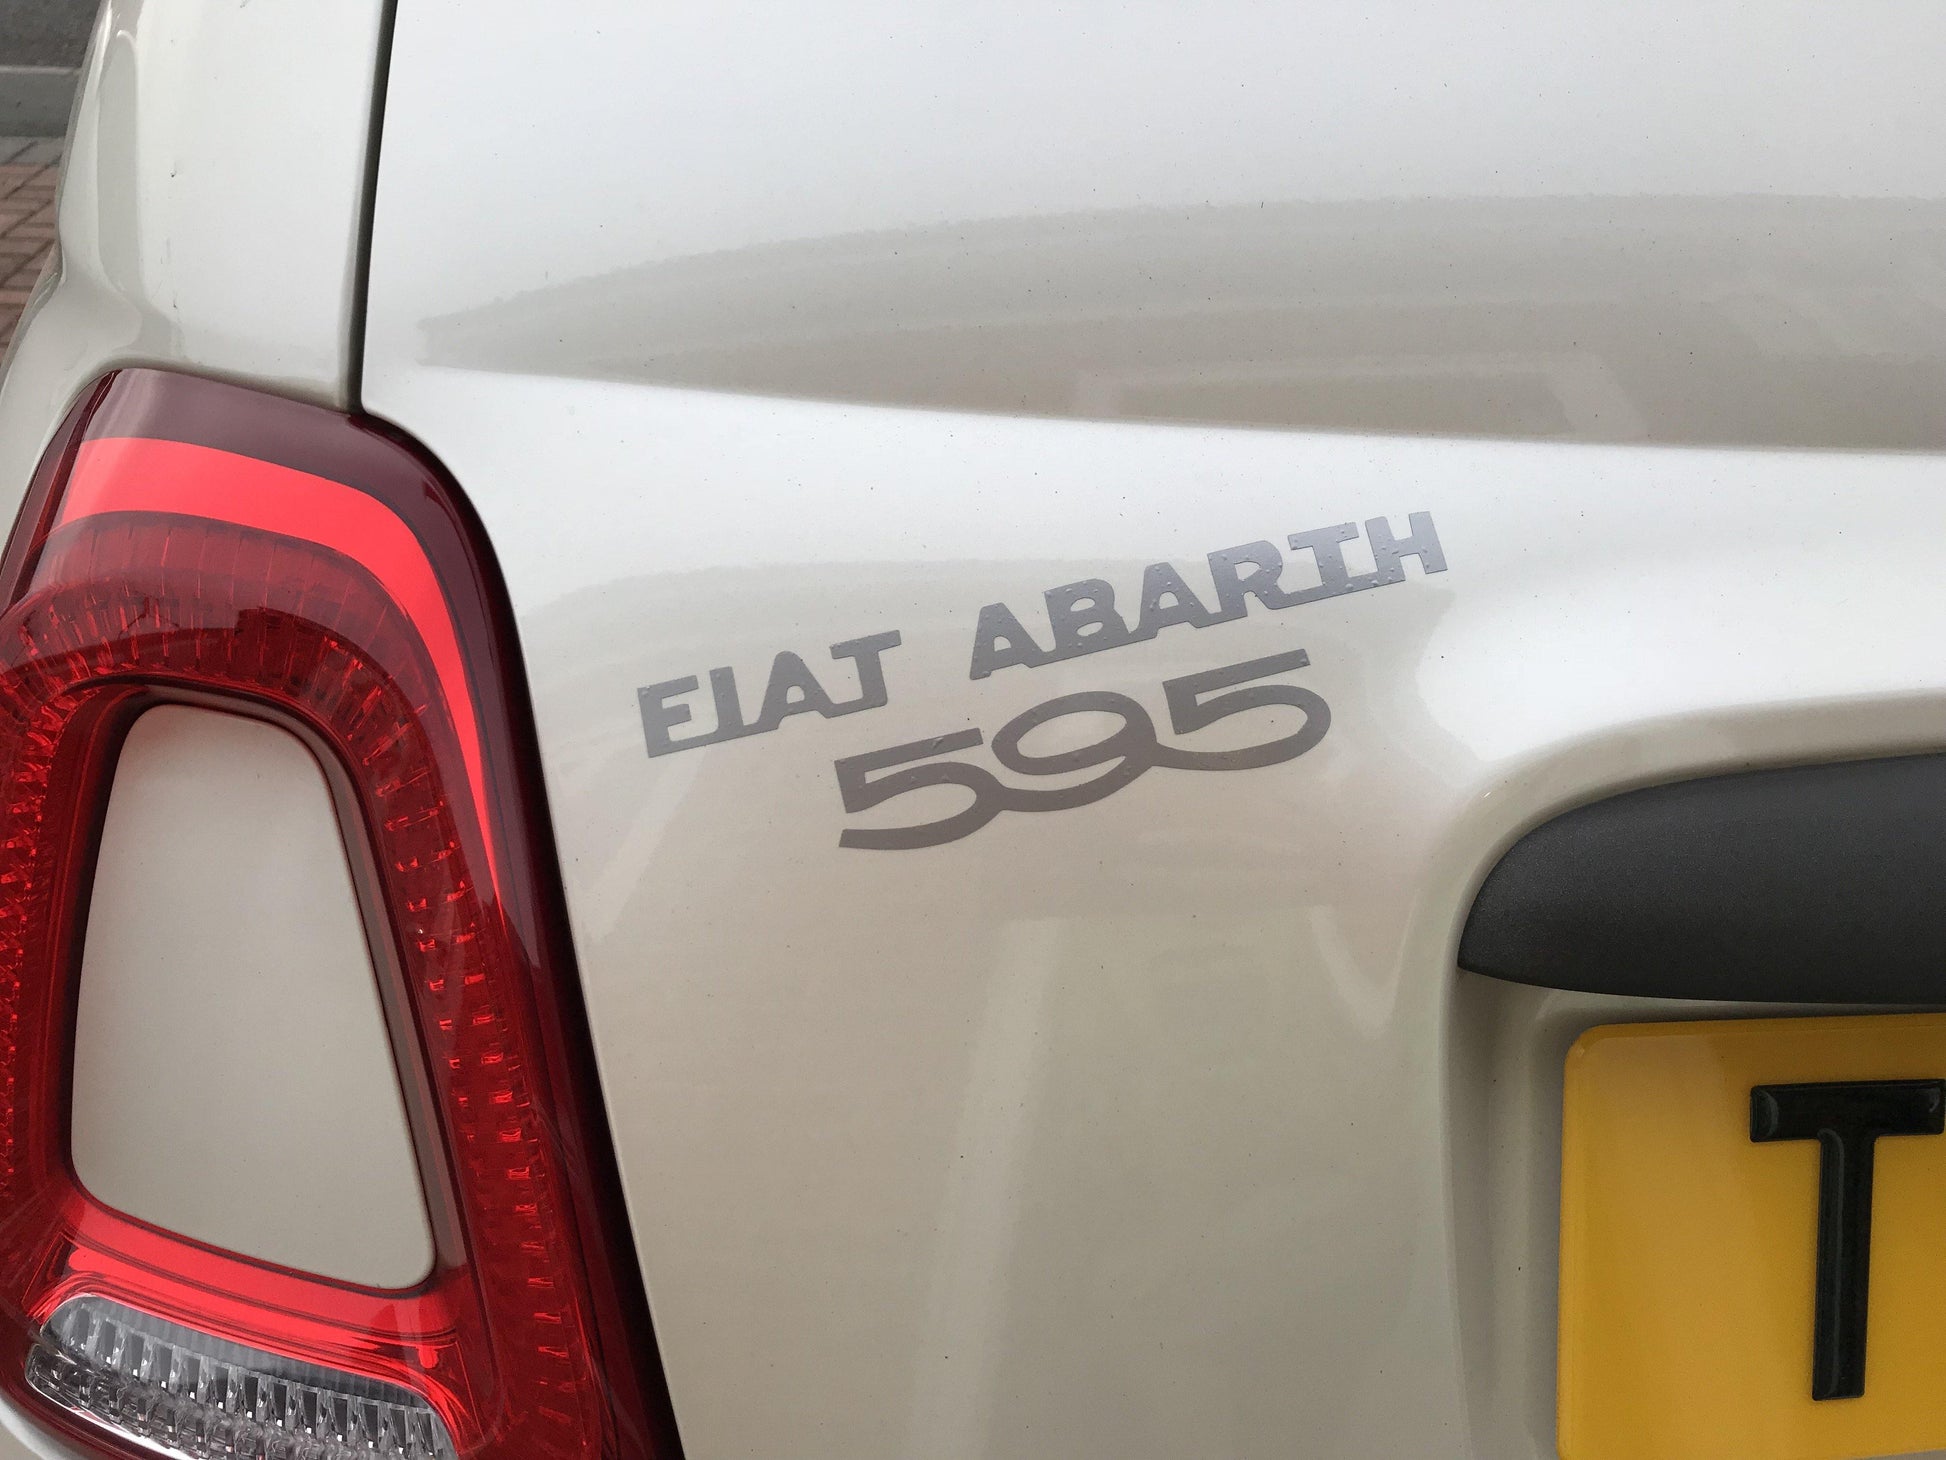 Abarth Anniversary Edition style Fiat Abarth 595 decal - Abarth Tuning